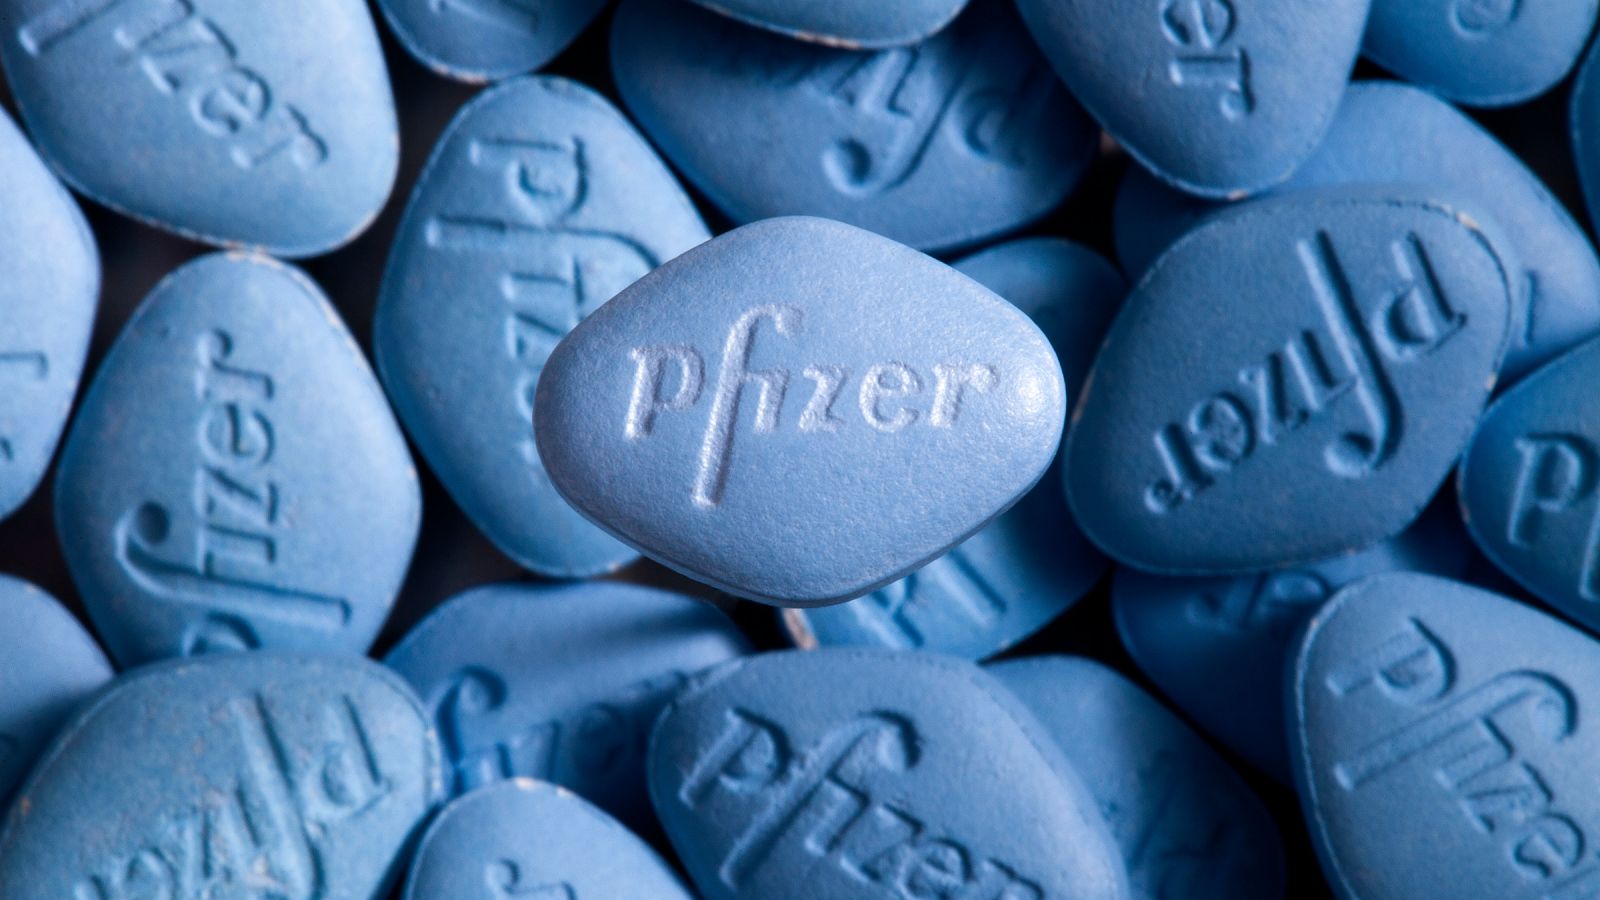 Pfizer Inc. (PFE) Just Had This Drug Approved By The European Commission